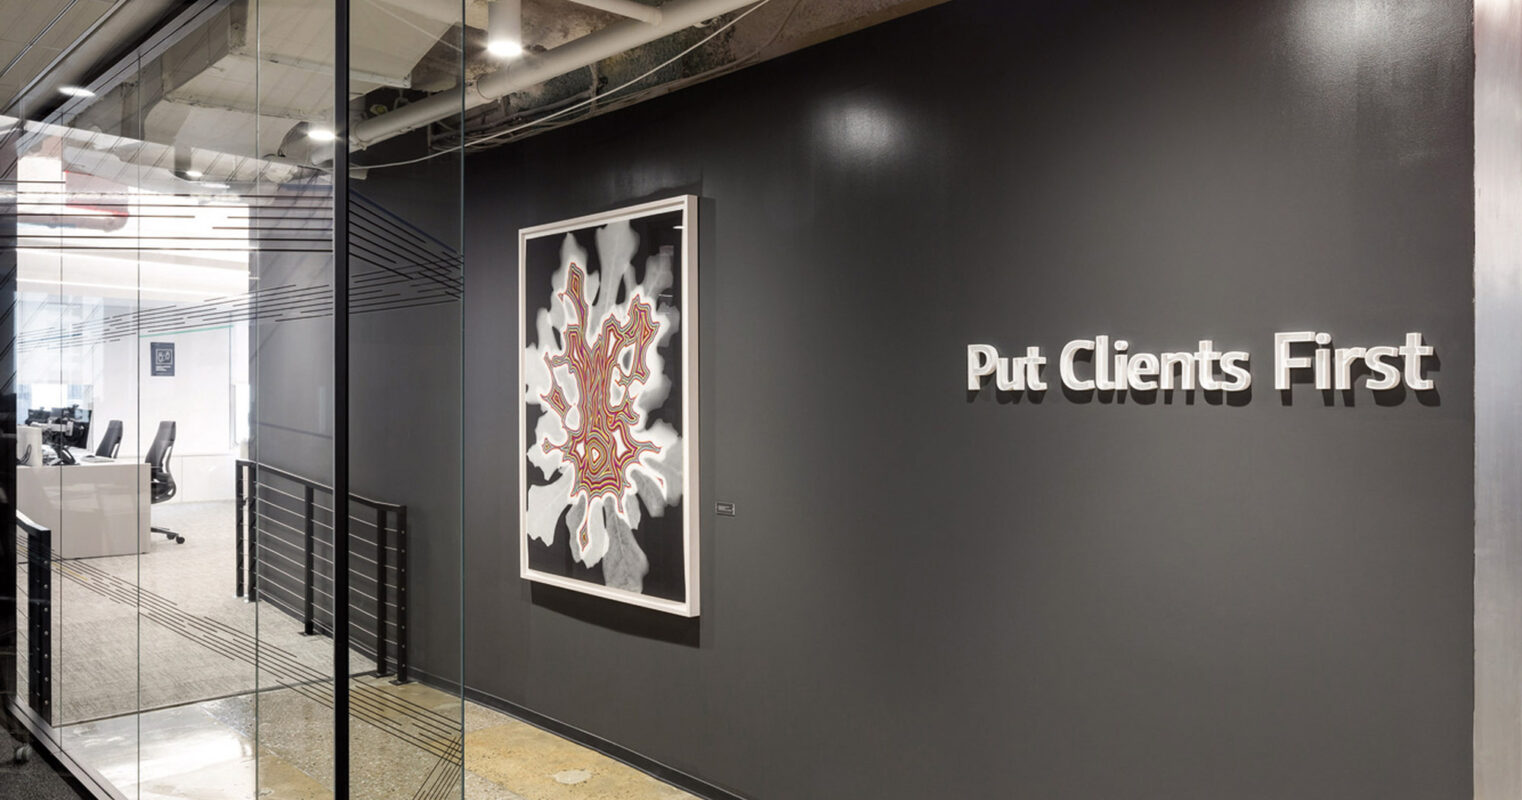 Modern office interior with industrial style featuring exposed ceiling and polished concrete floors. The focal point is a bold dark accent wall with motivational text "Put Clients First" beside framed abstract art, reflecting a professional yet creative workspace ambiance.